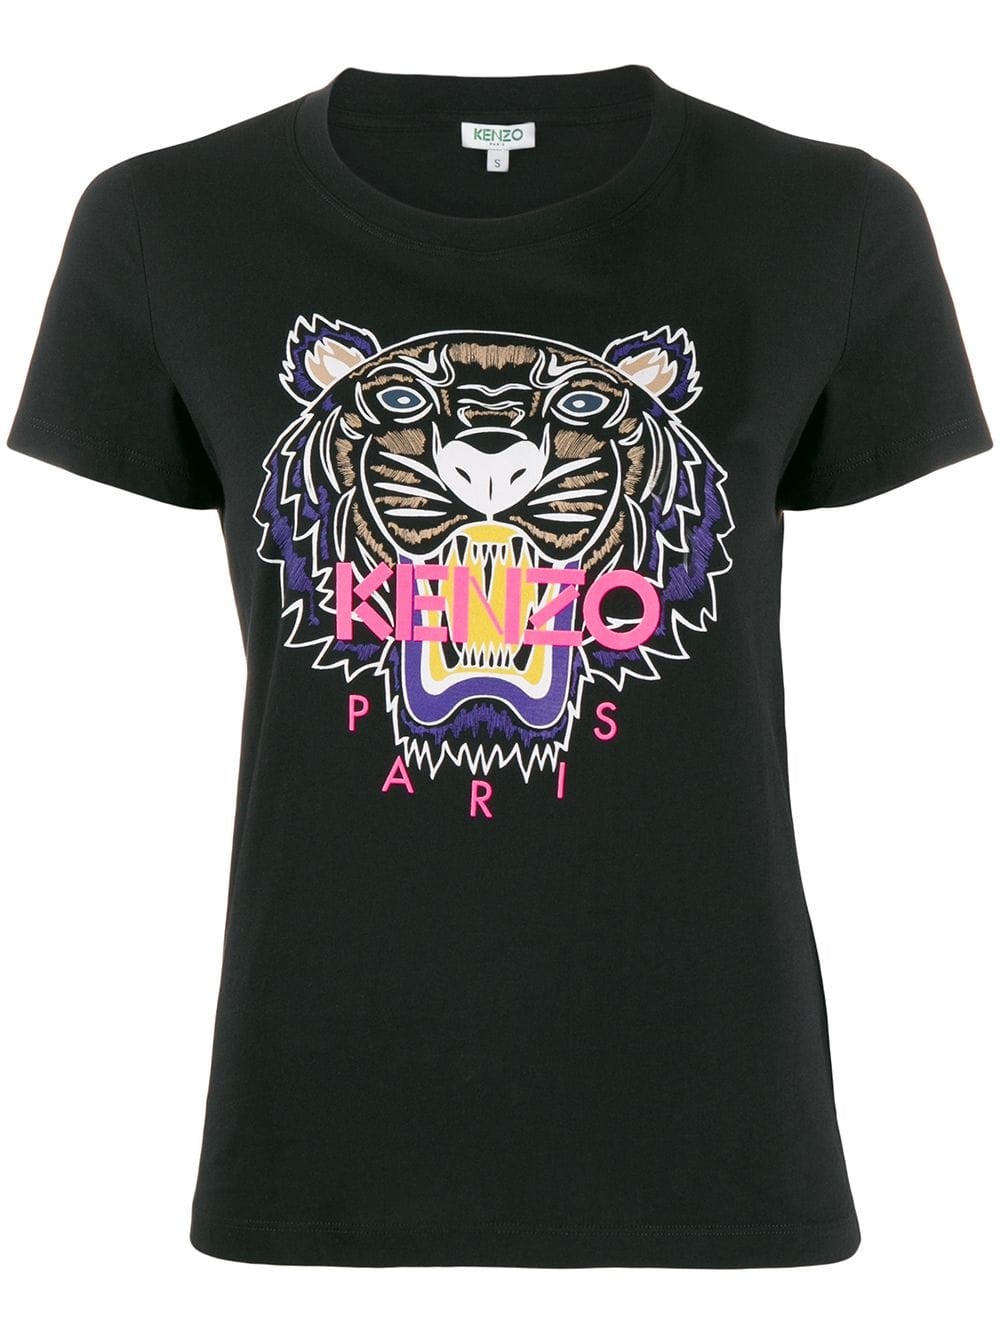 kenzo TIGER T-SHIRT available on montiboutique.com - 30331